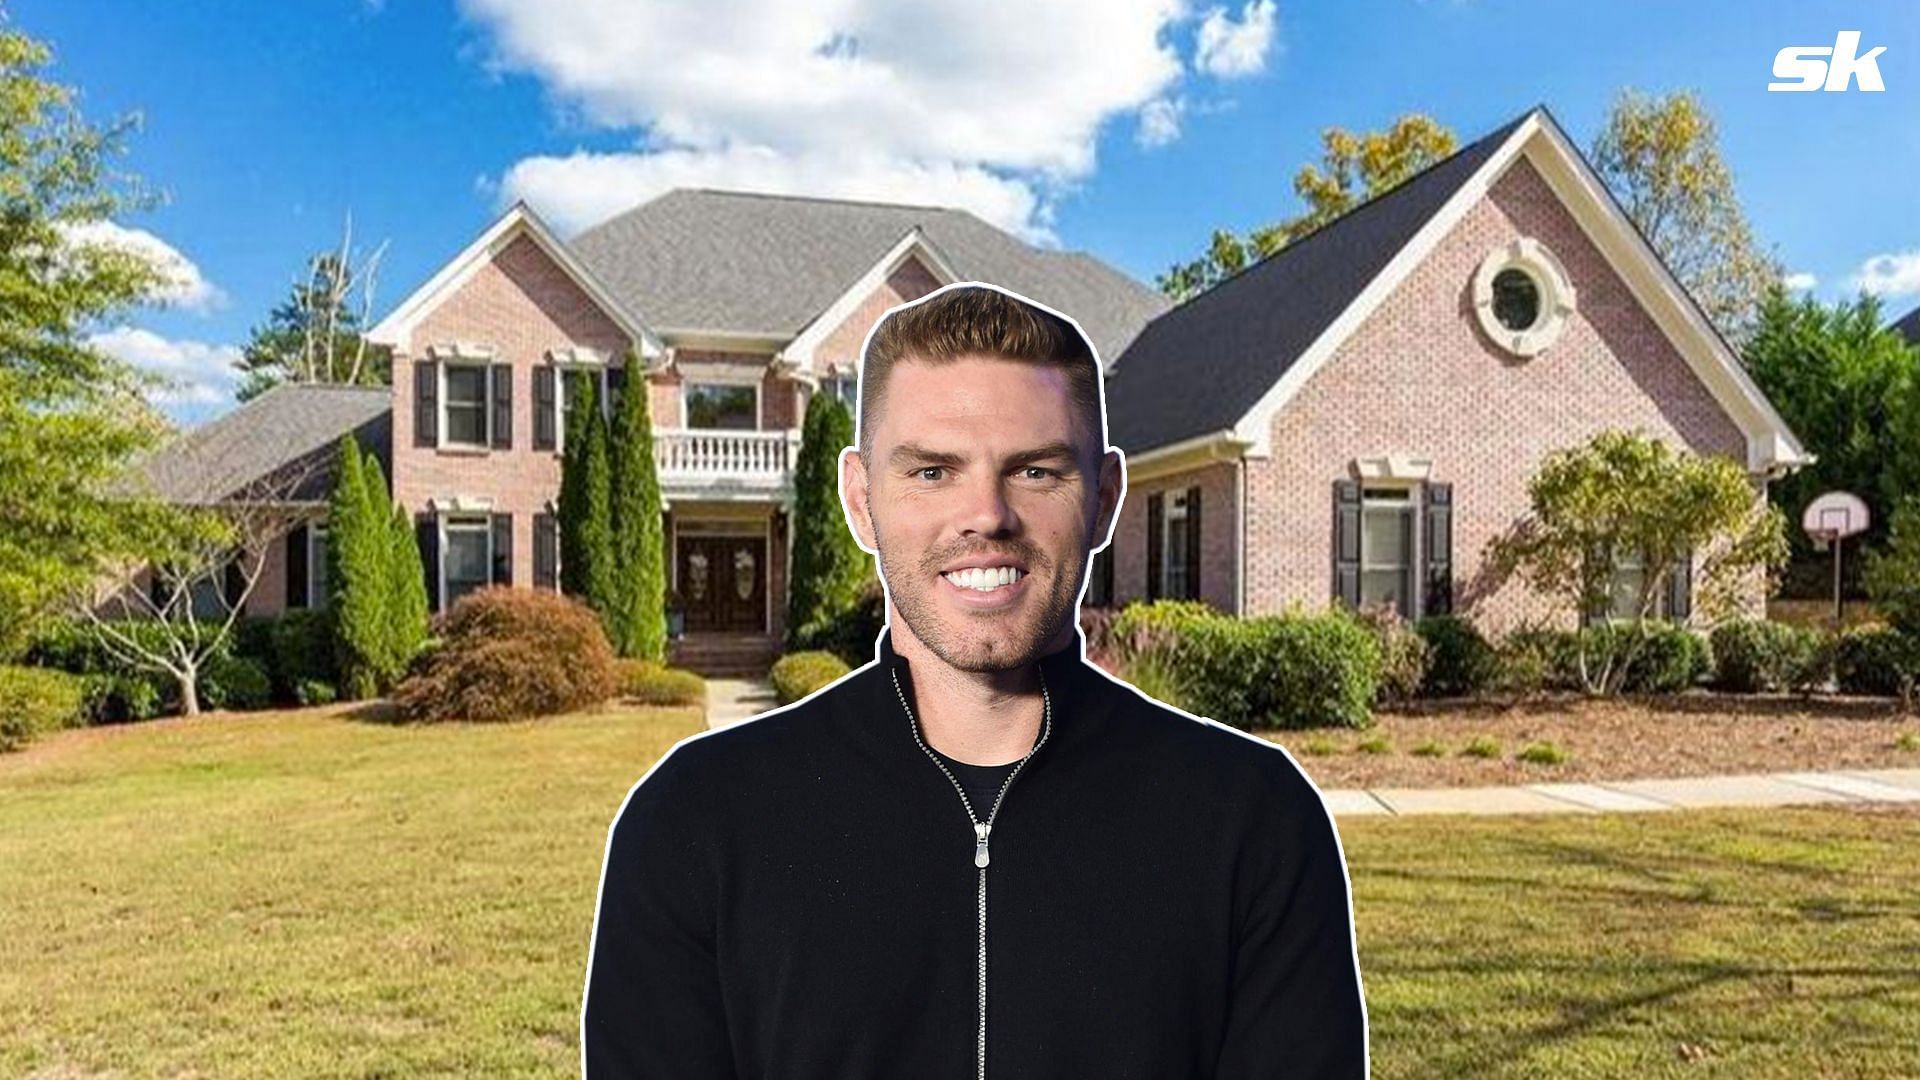 Freddie Freeman sold his &quot;starter home&quot; in the Atlanta suburbs for $775,000 in 2017